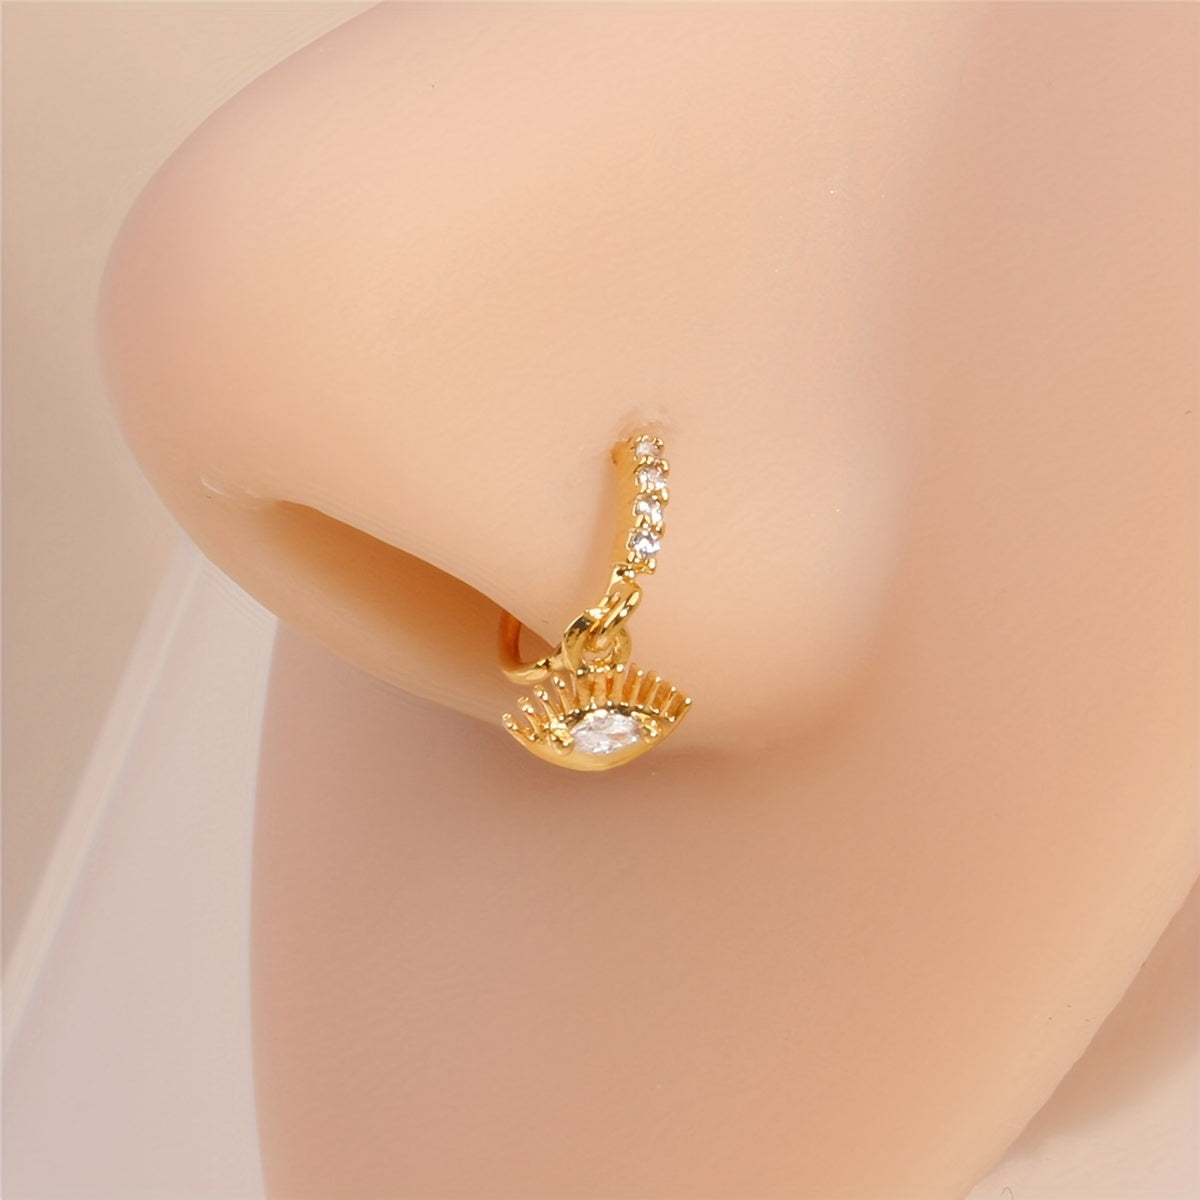 Devil's Eye Shape Pendant Nose Ring 18k Plated Gold Cartilage Earring Dangling Nose Piercing Jewelry For Women And Girls